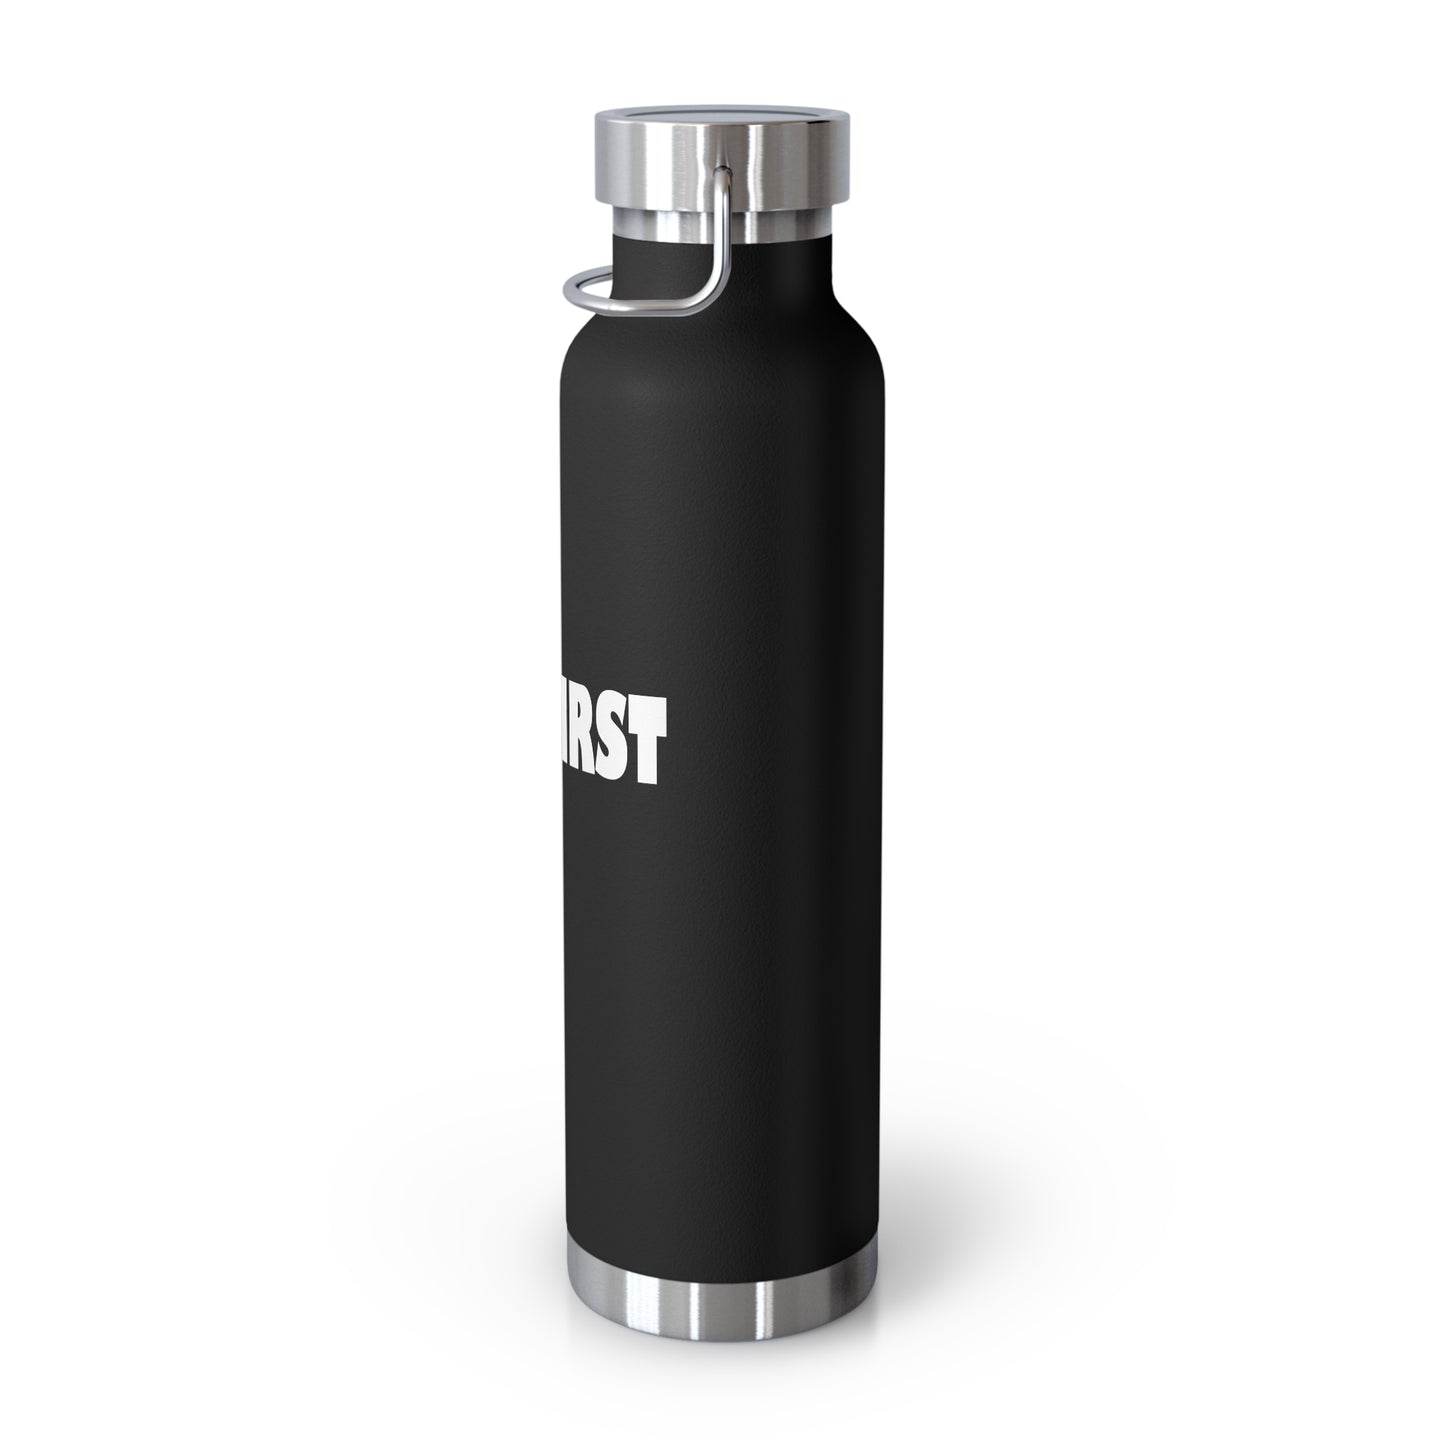 YAH FIRST 22oz Copper Vacuum Insulated Bottle